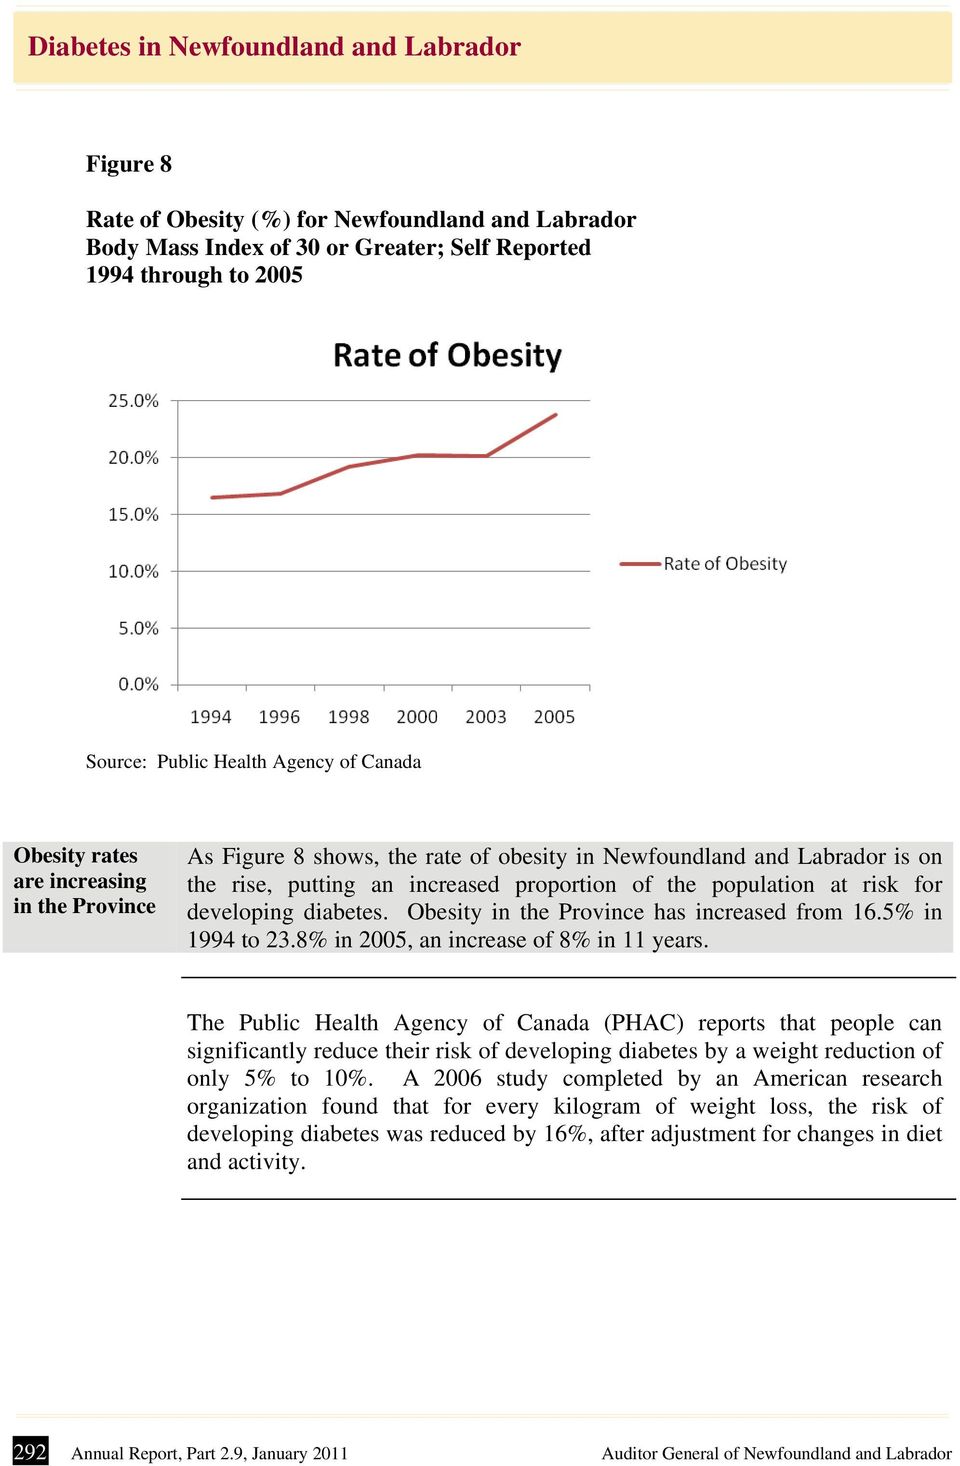 Obesity in the Province has increased from 16.5% in 1994 to 23.8% in 2005, an increase of 8% in 11 years.